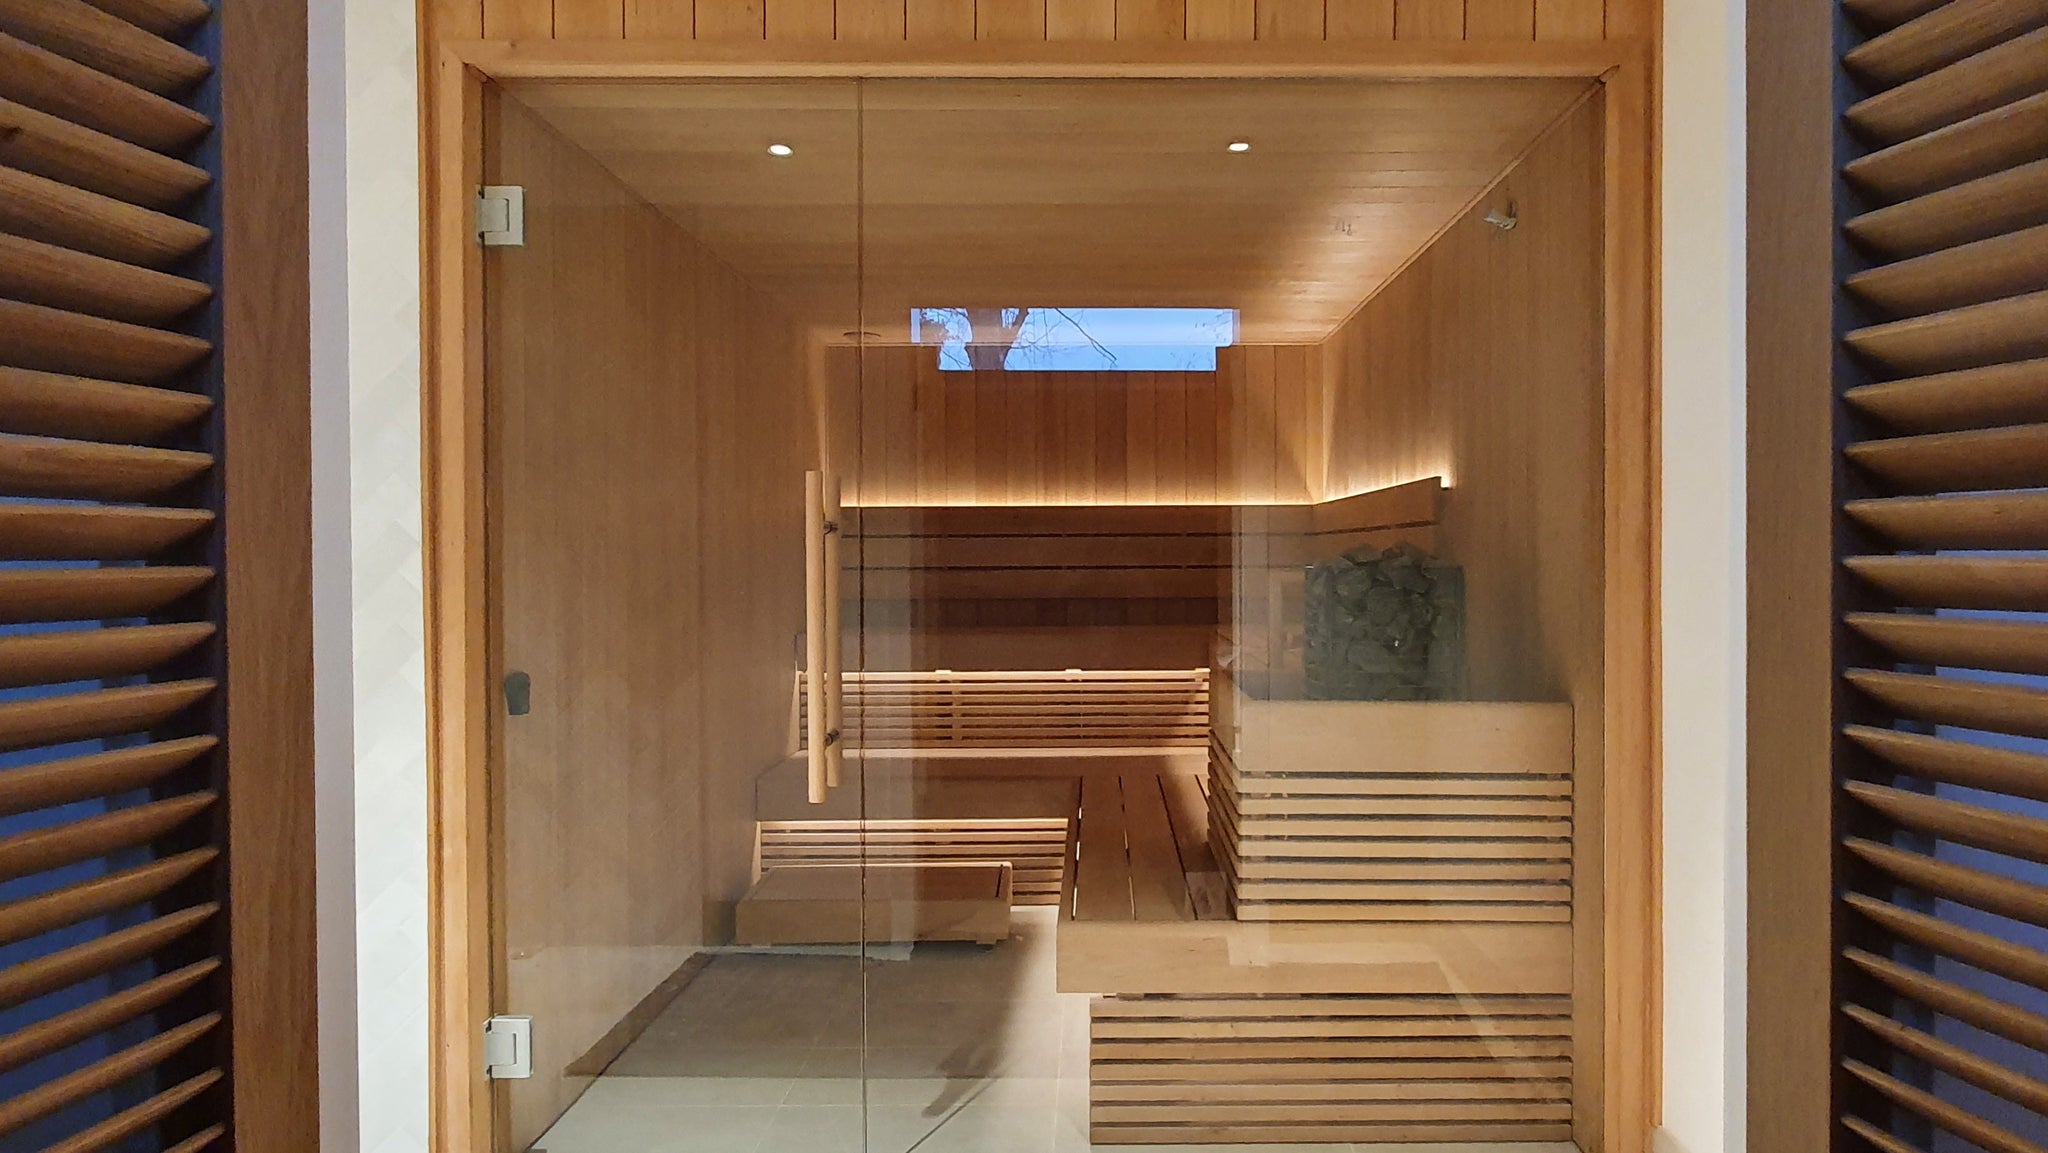 This Bespoke Alder Sauna Installation has a full glass wall, through which you can see a vertically clad sauna using alder tongue and groove cladding, an L shaped sauna bench system with an upper and lower bench and a Narvi Velvet Electric Sauna Heater.